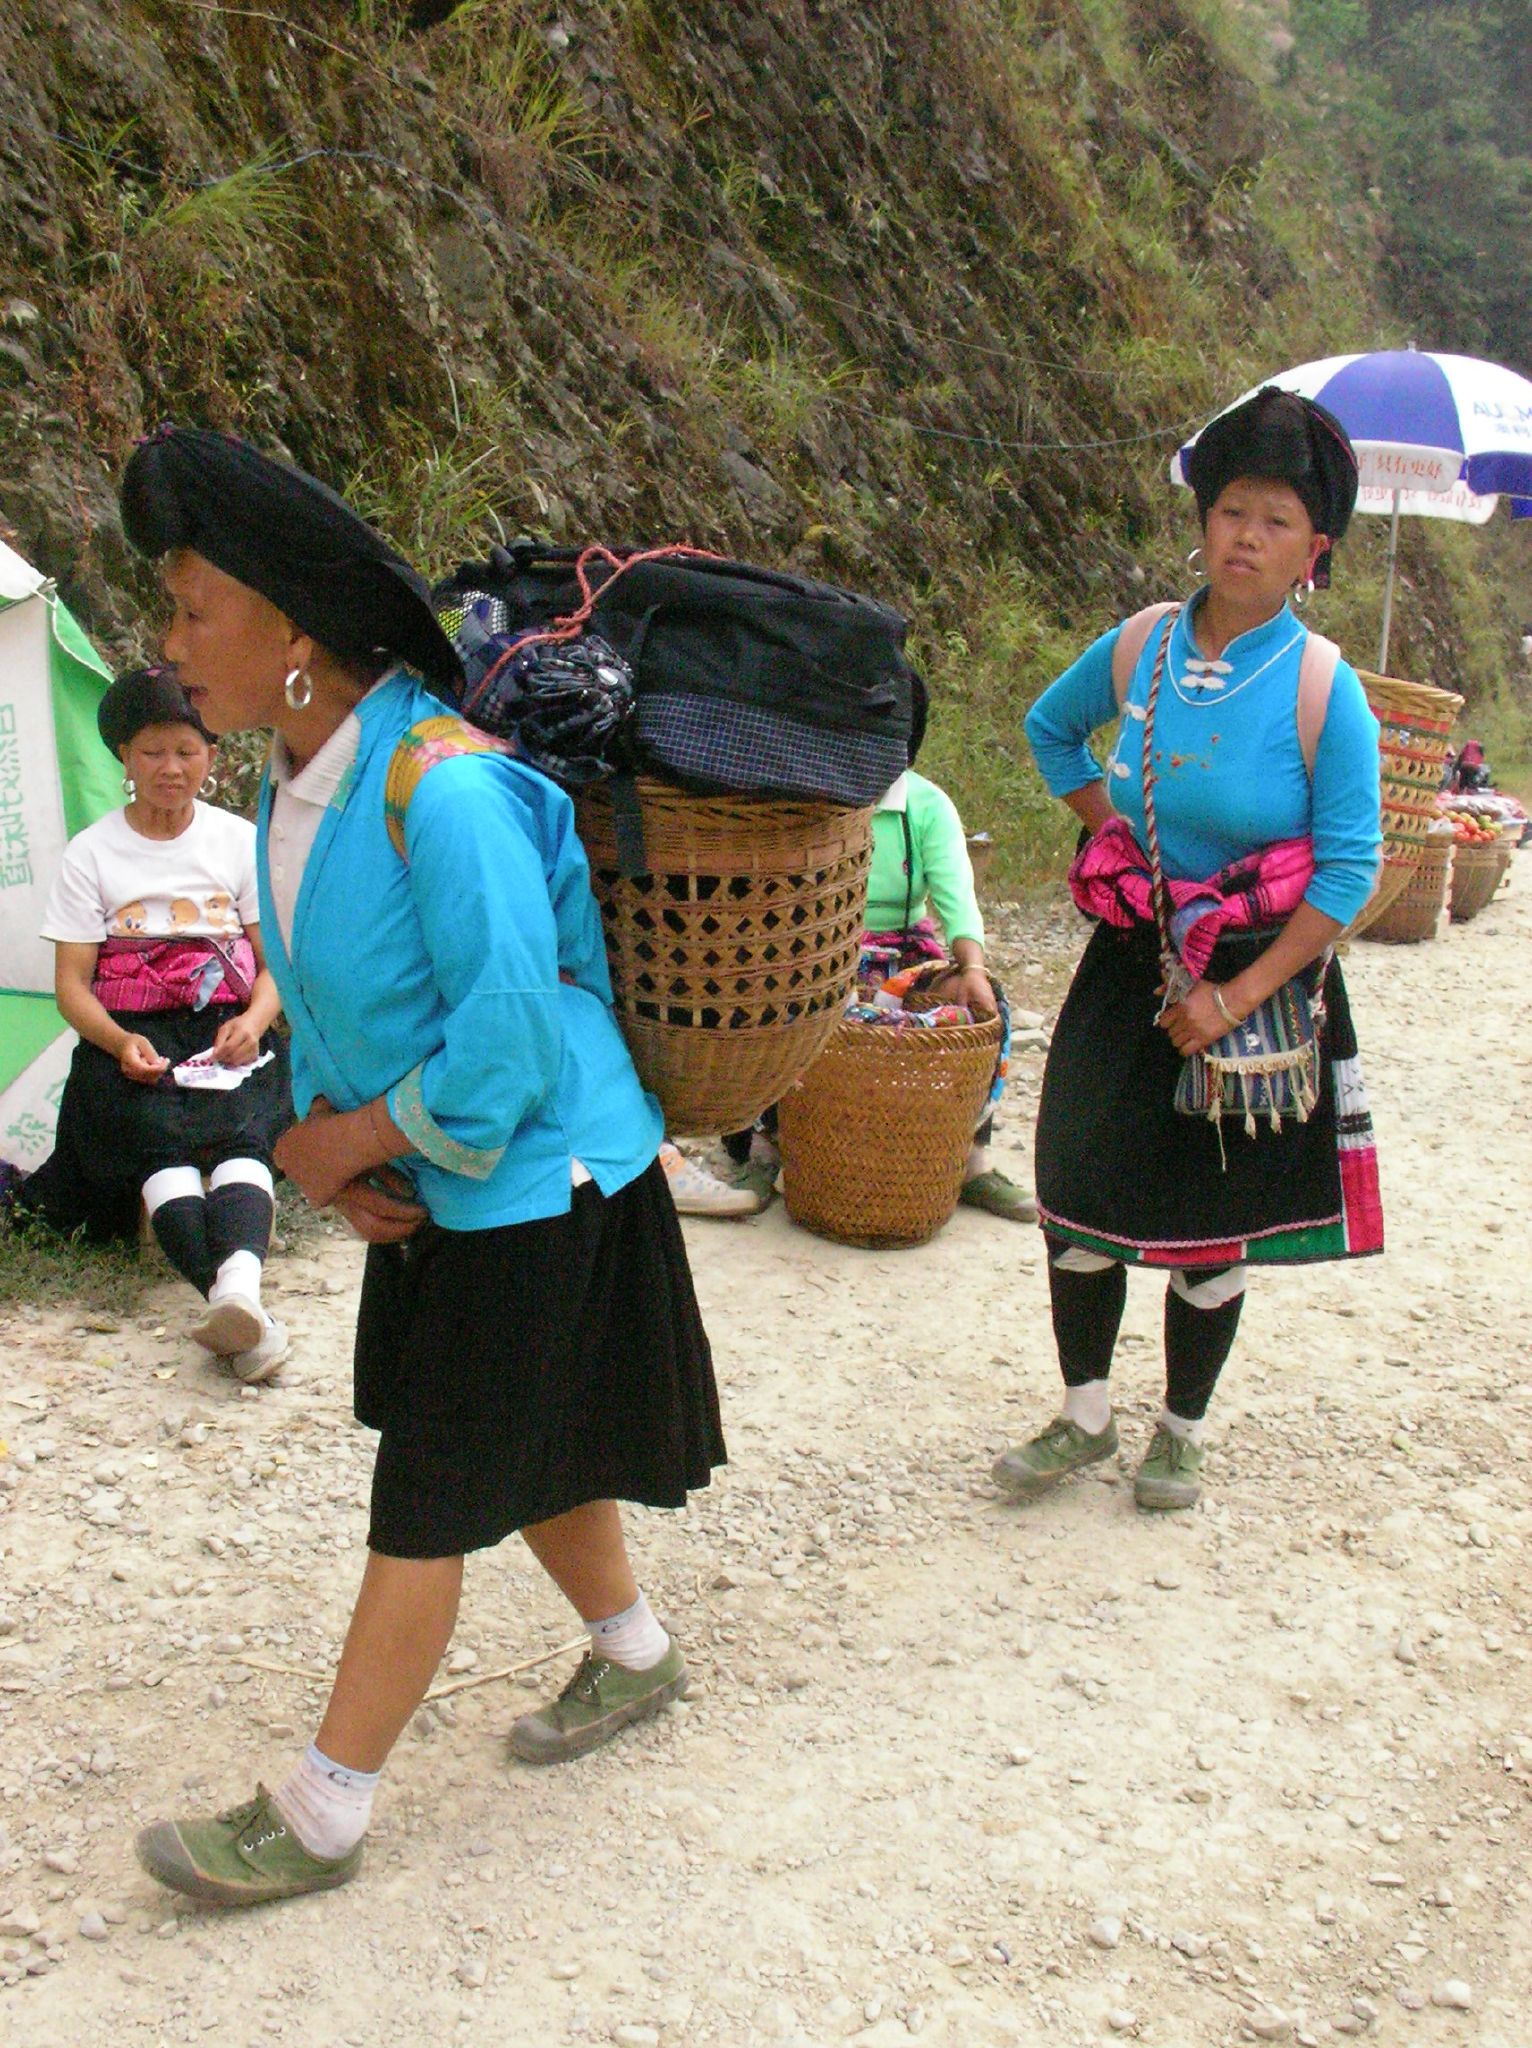 women in traditional mexican clothing walking down the dirt road